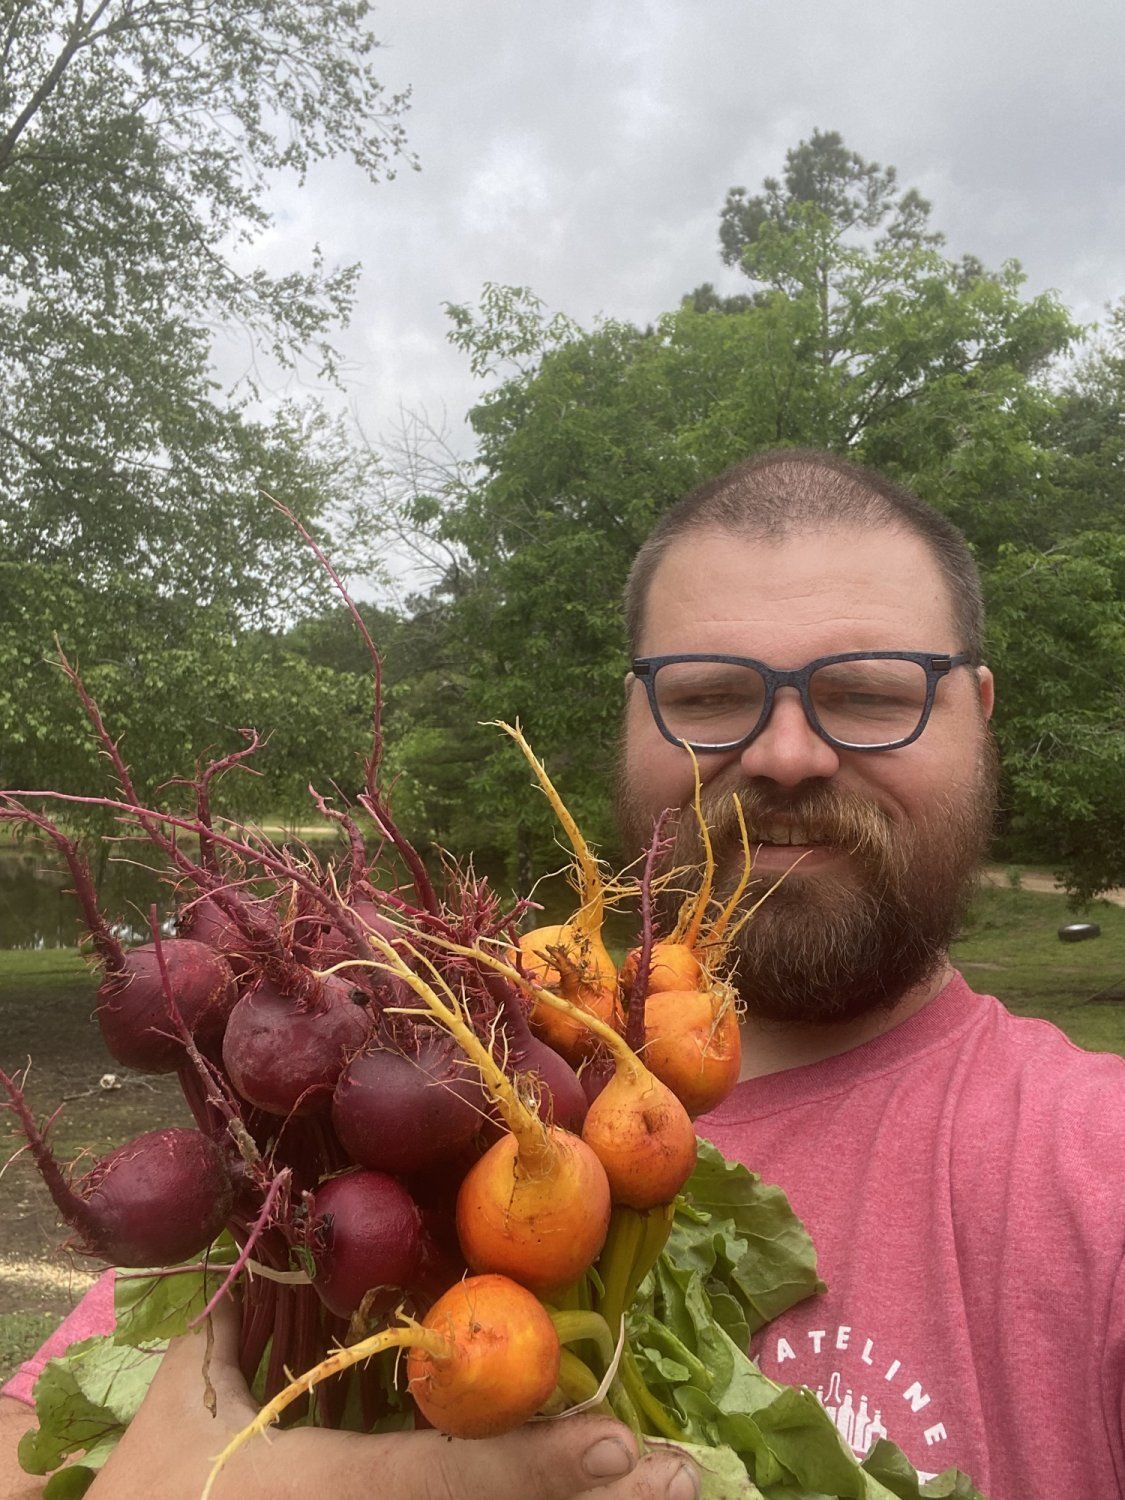 You Can't Beet Our Homegrown Produce!